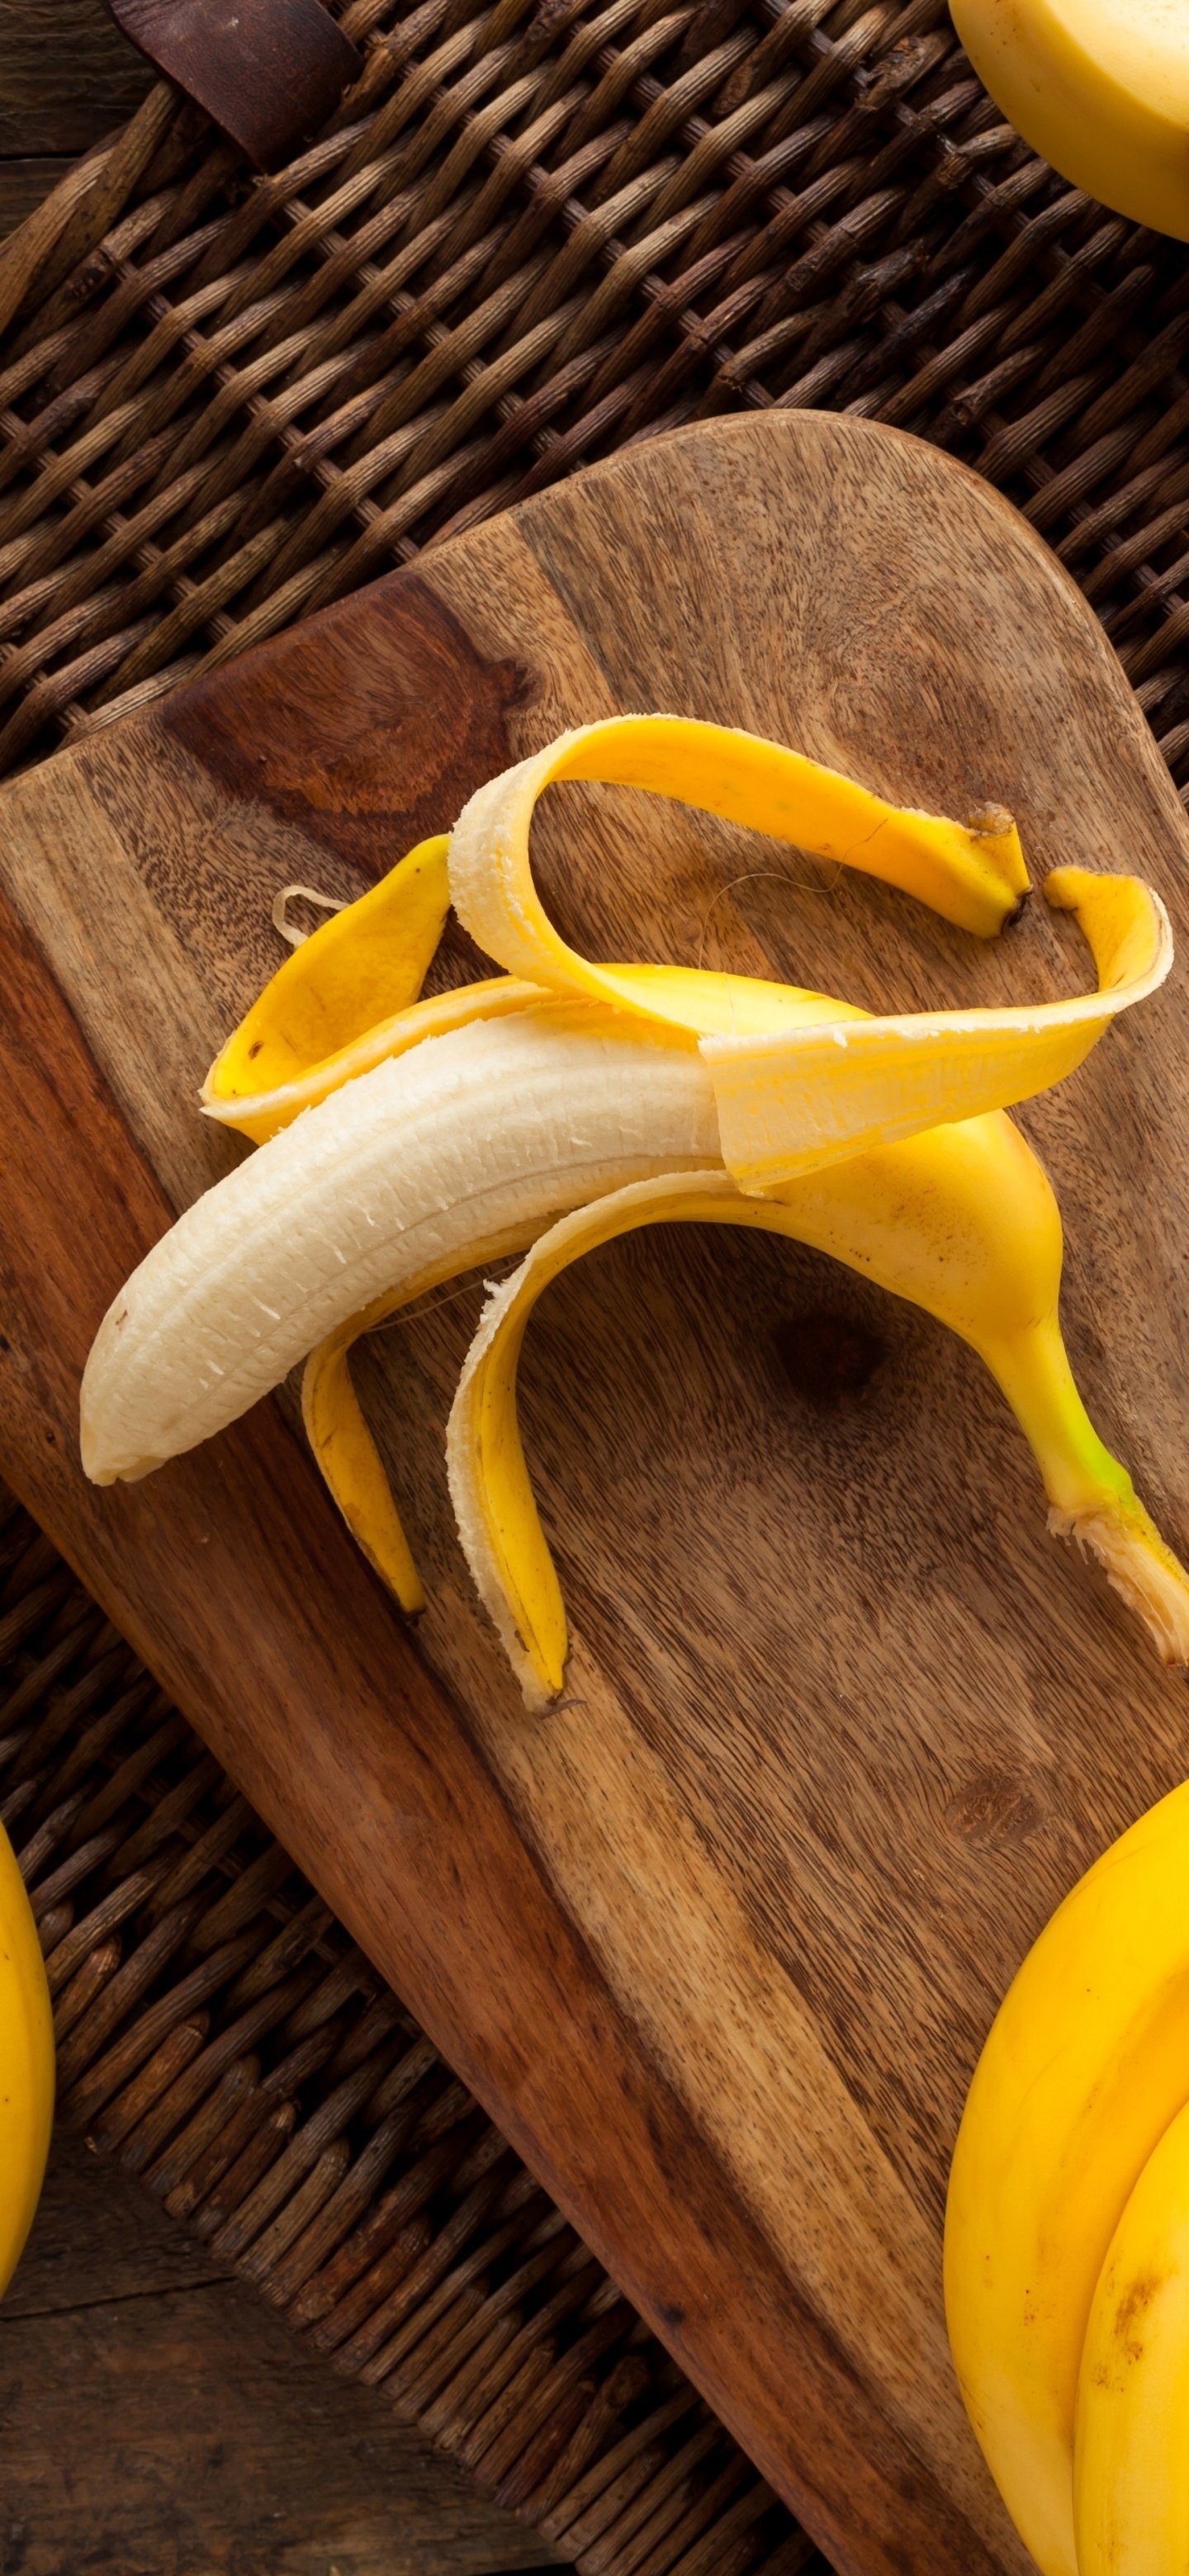 Banana feast, Culinary delight, Nutritious goodness, Finger-licking satisfaction, 1440x3120 HD Phone